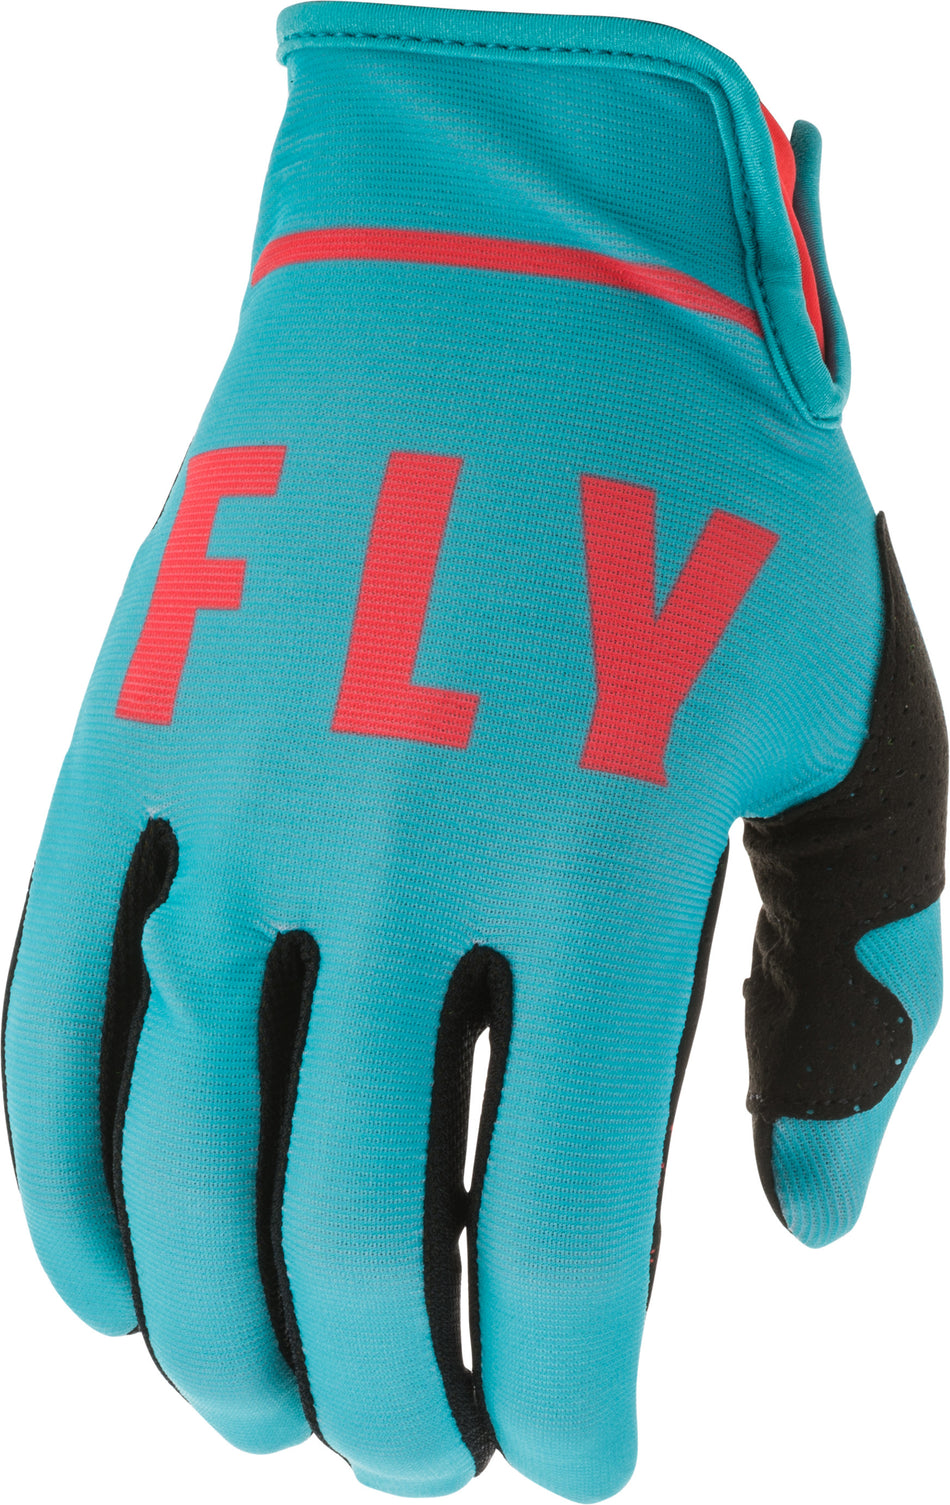 FLY RACING Lite Gloves Blue/Coral Sz 13 373-71913